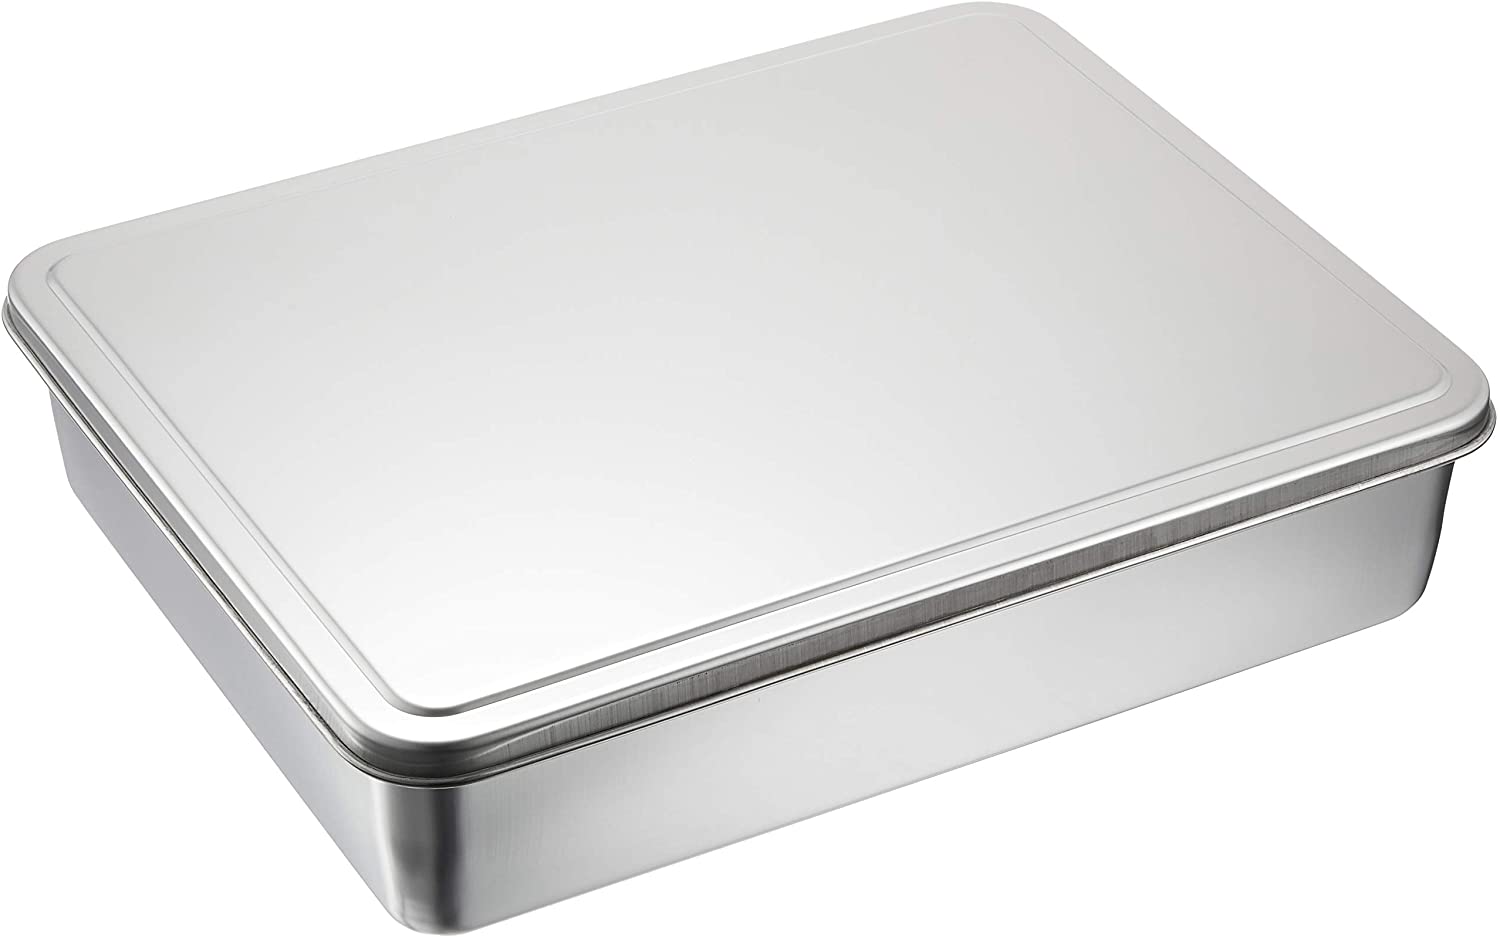 Stainless Steel Yakumi Pan Container with 3 Compartments